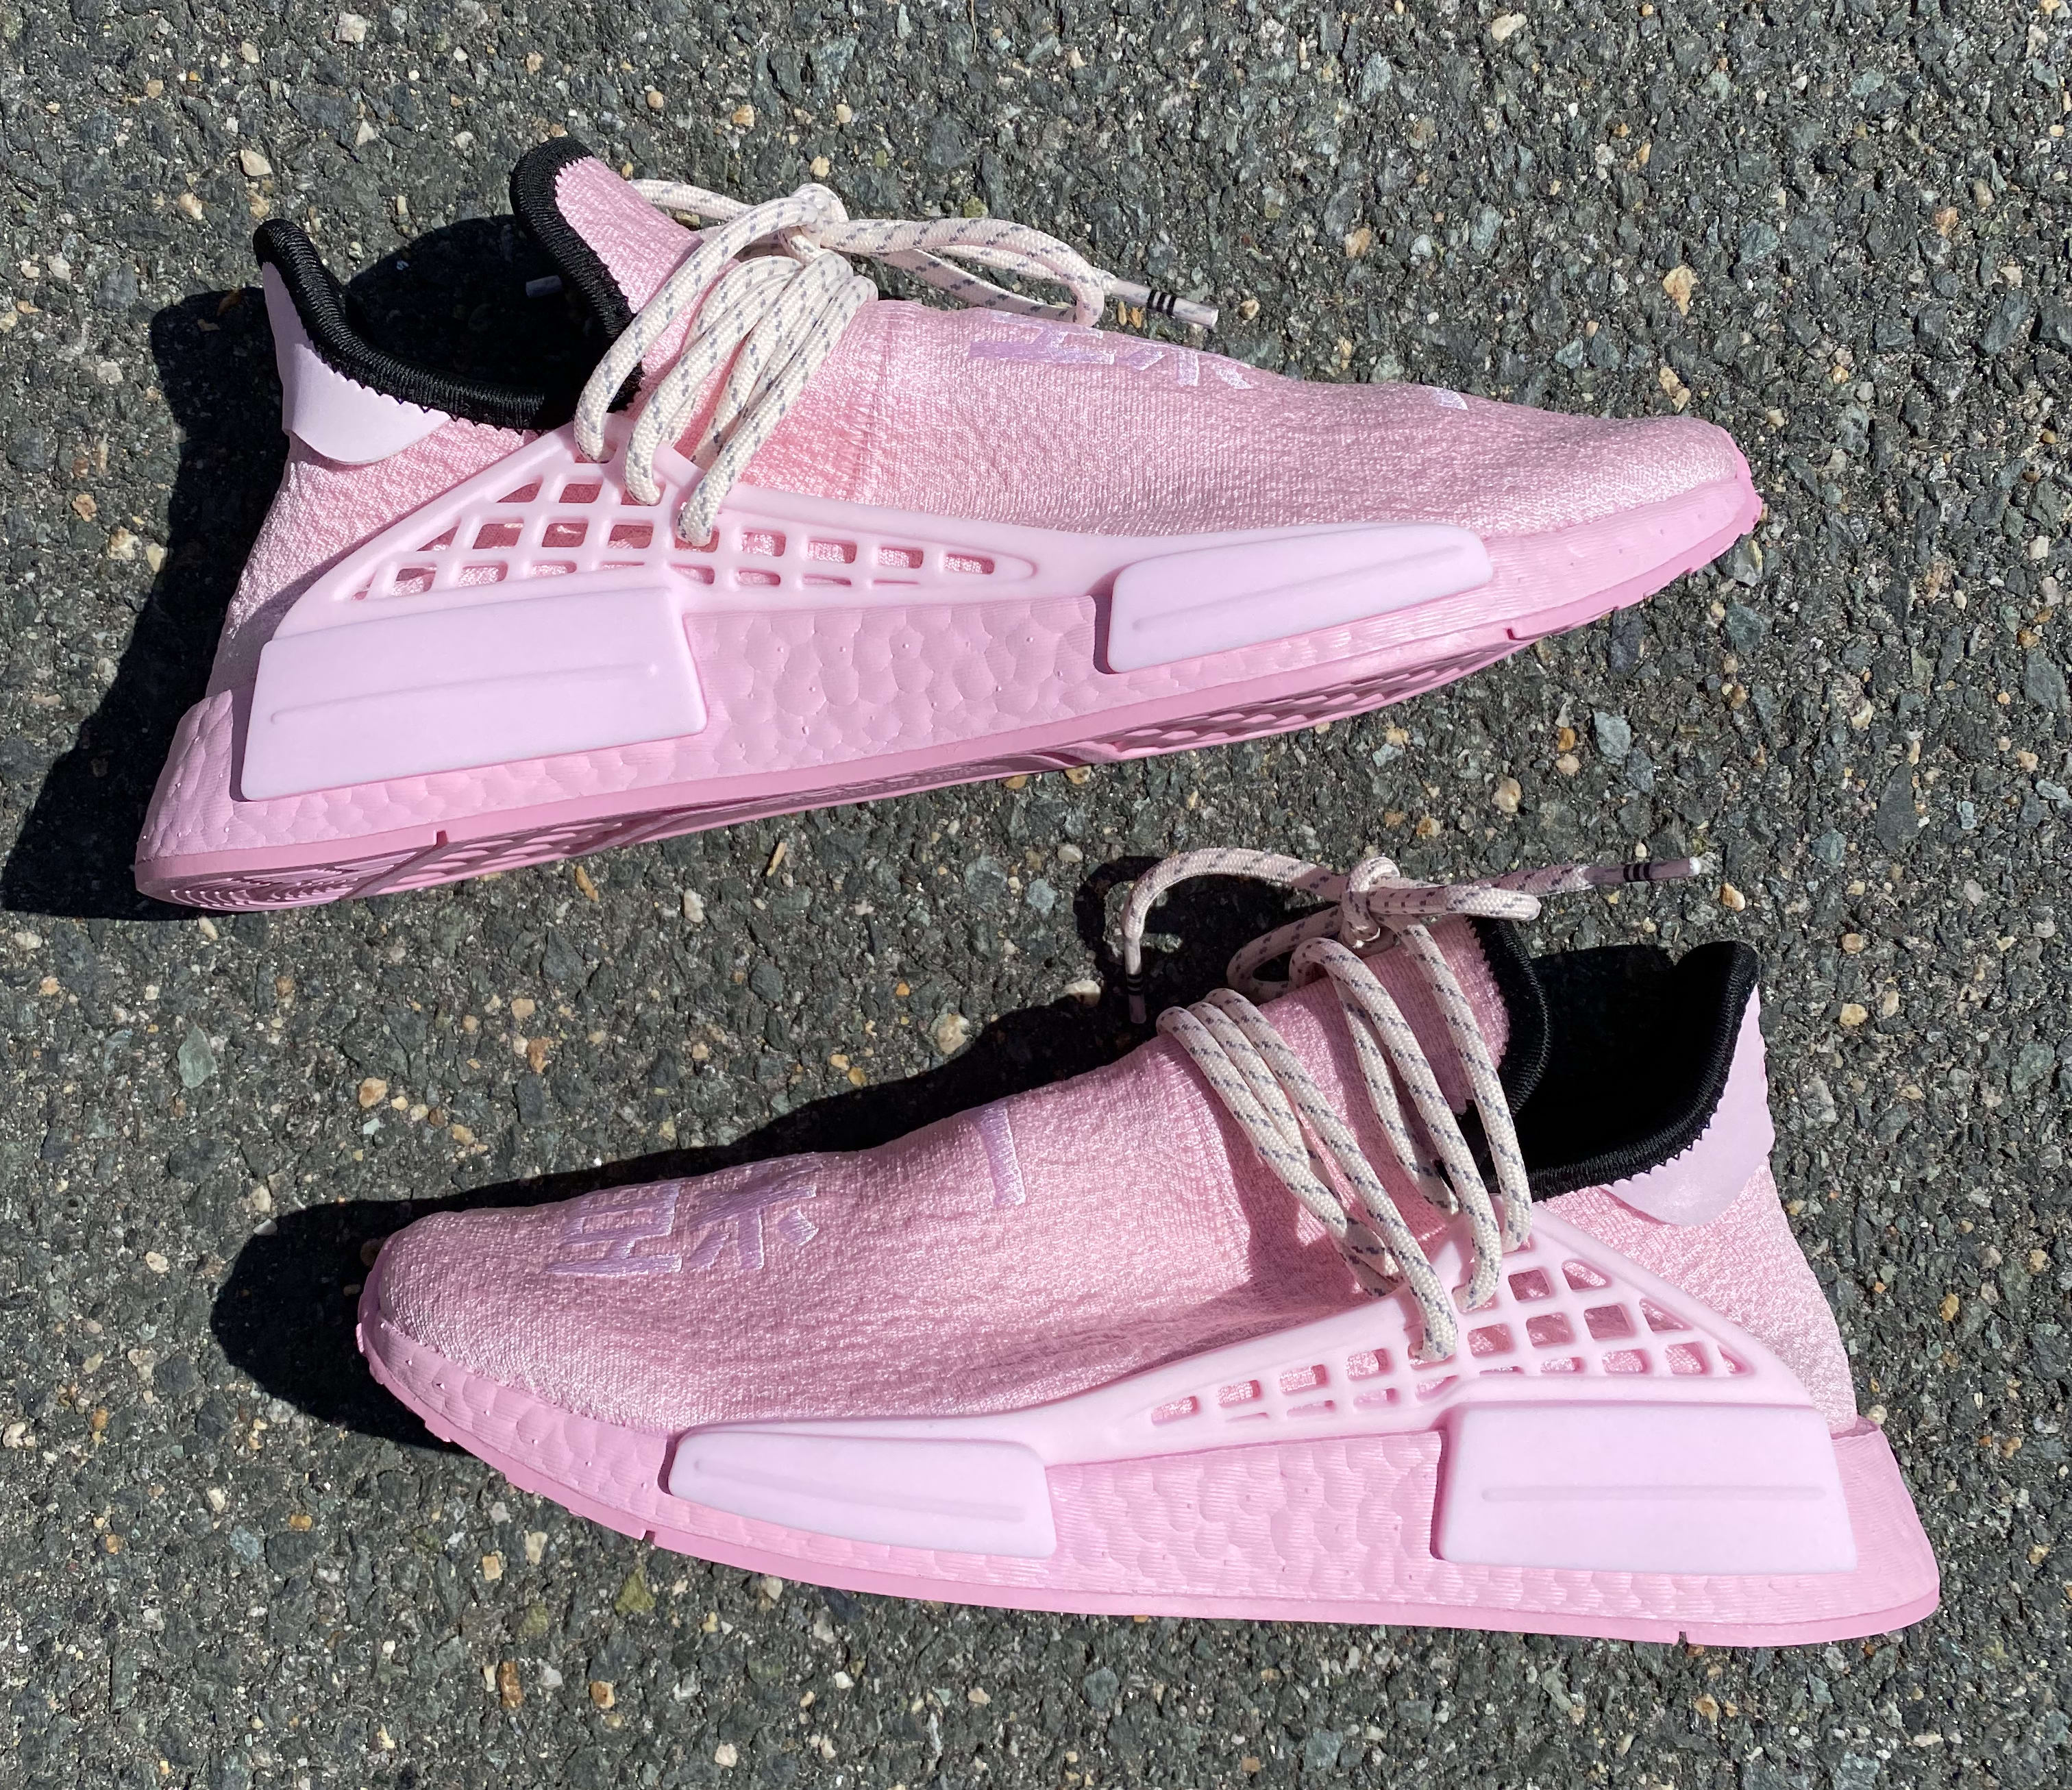 Pharrell's Next Adidas NMD Is Releasing This Week | Complex